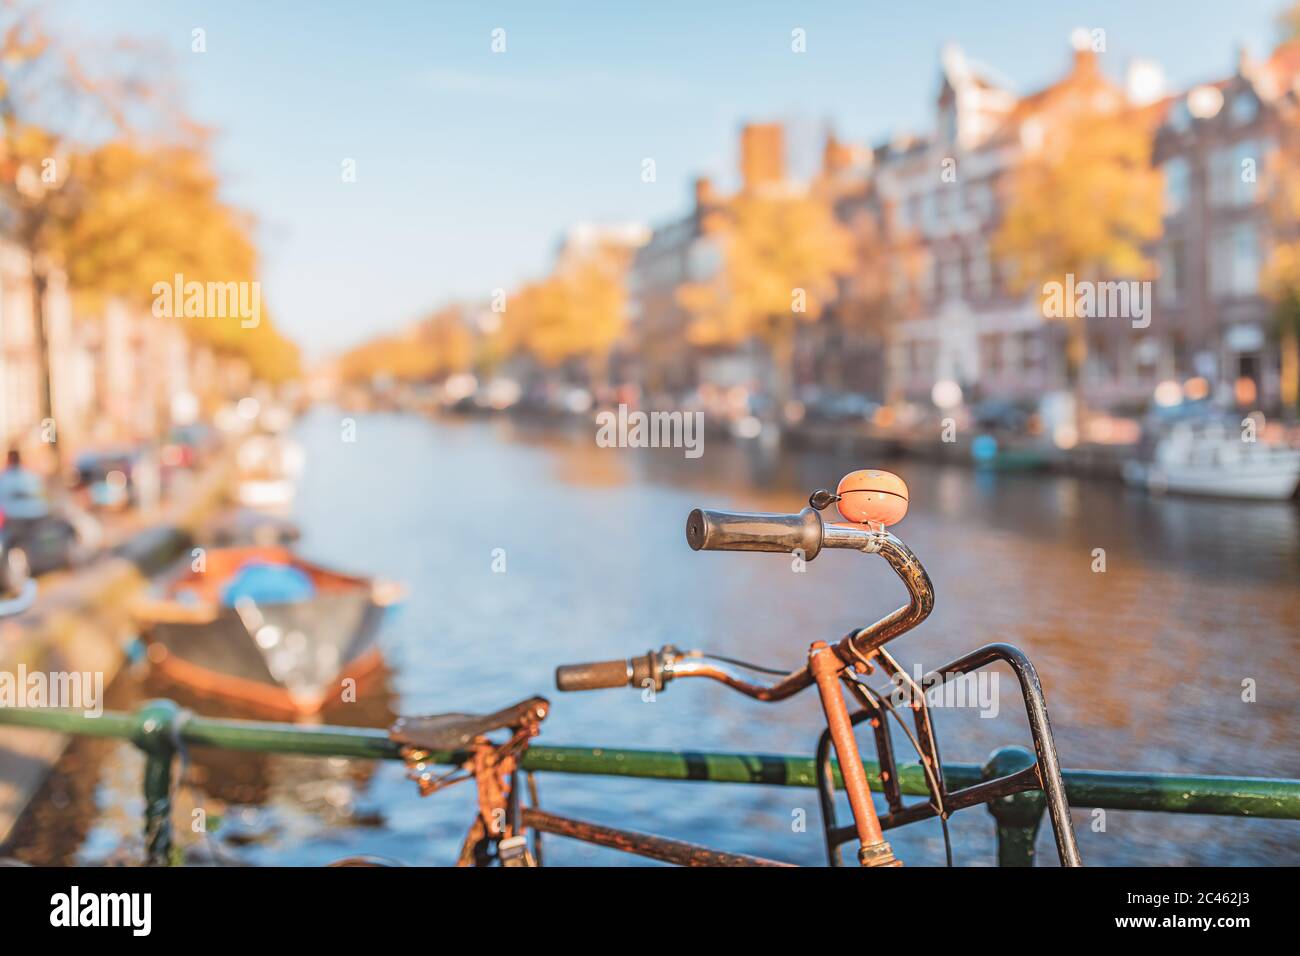 Bicycle with orange bell in front of canal in Amsterdam in autumn Stock Photo